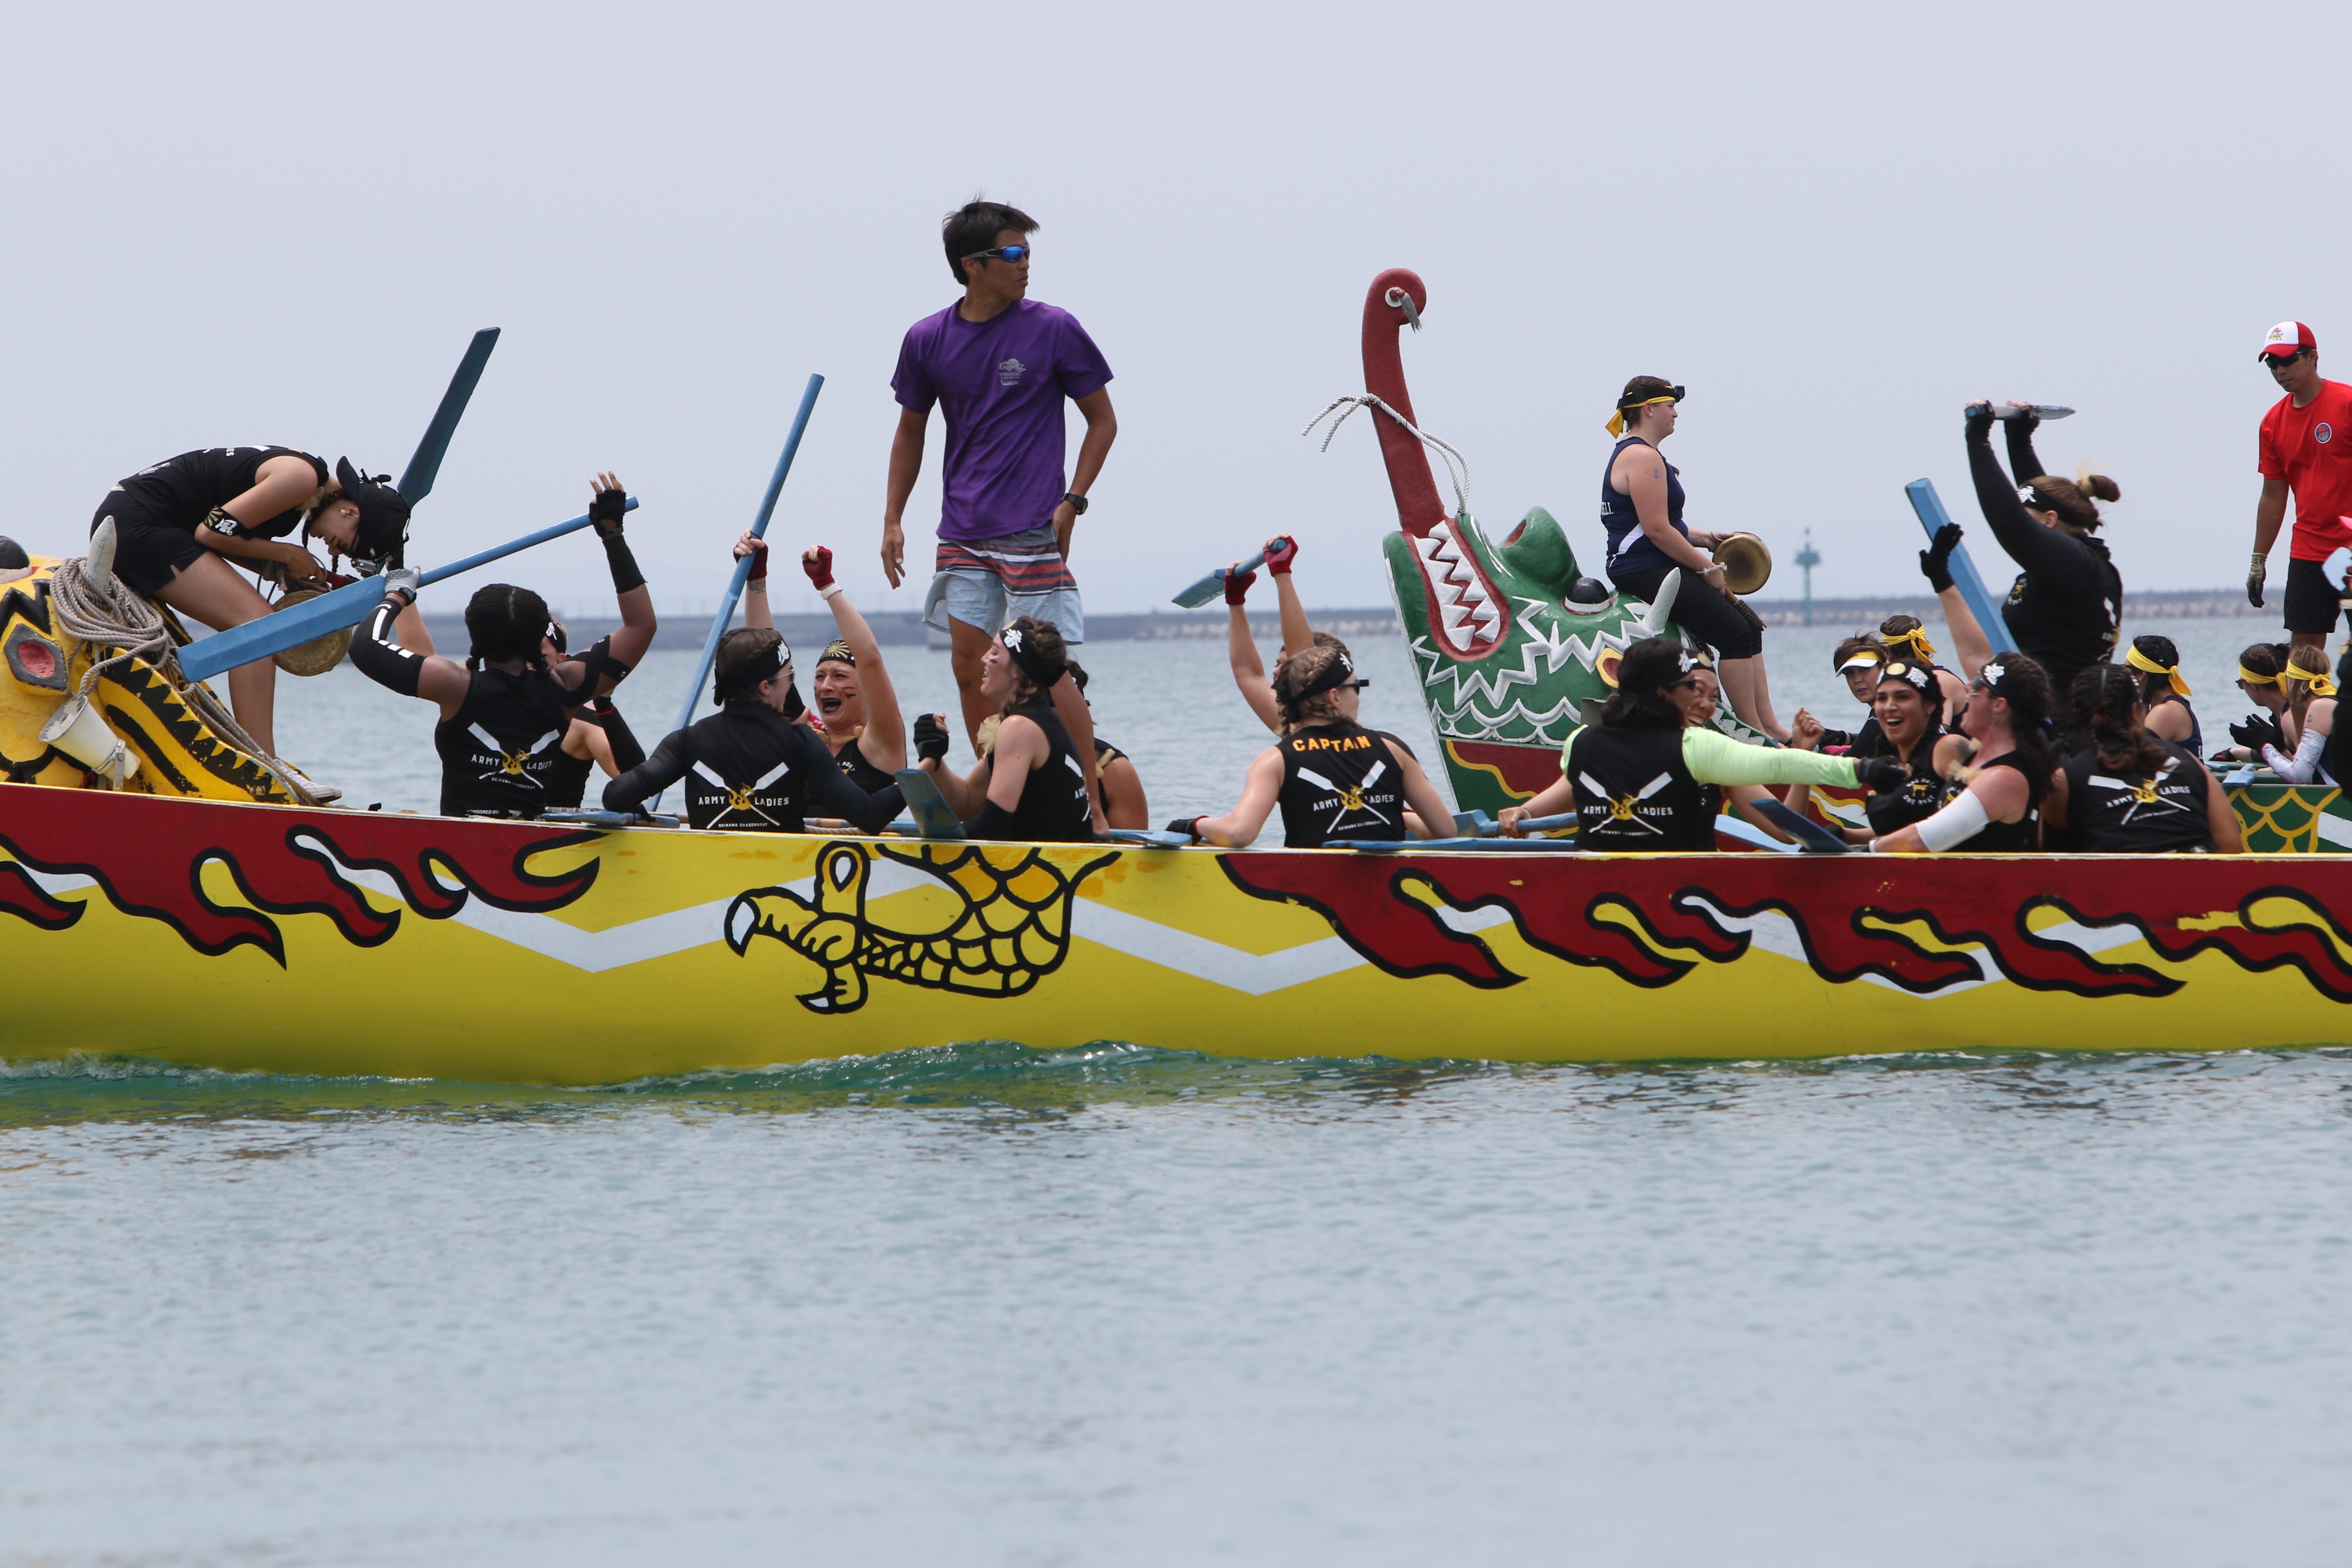 U.S. Army Men's and Women's Teams Compete in Annual Okinawa Dragon Boat